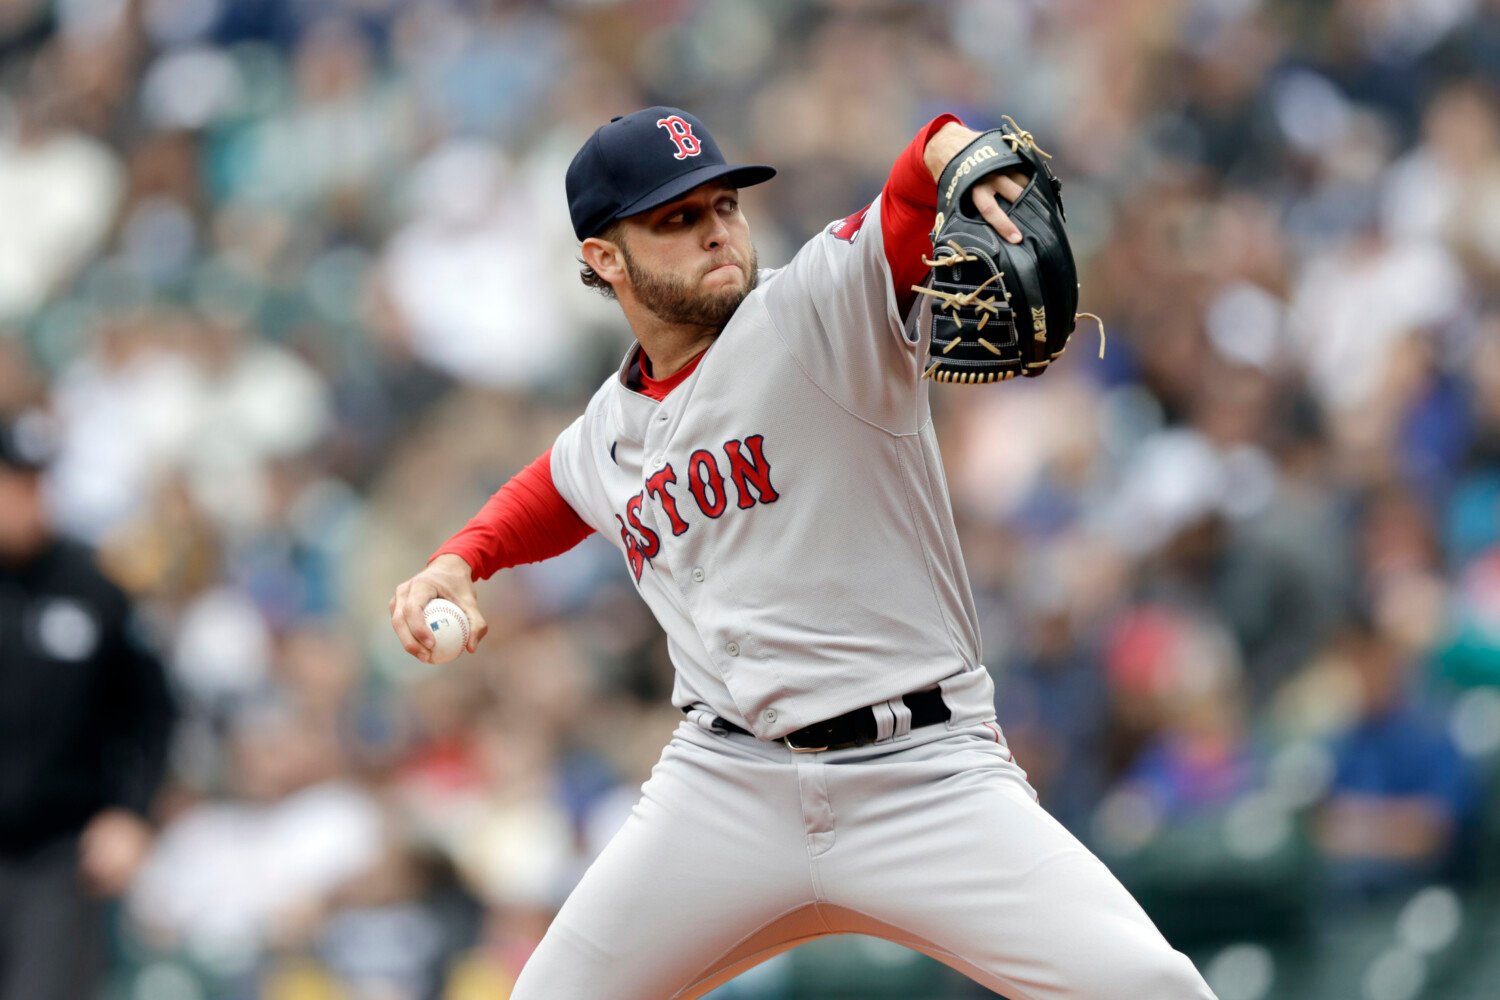 Tom Caron: It's been a wild ride so far for the Red Sox